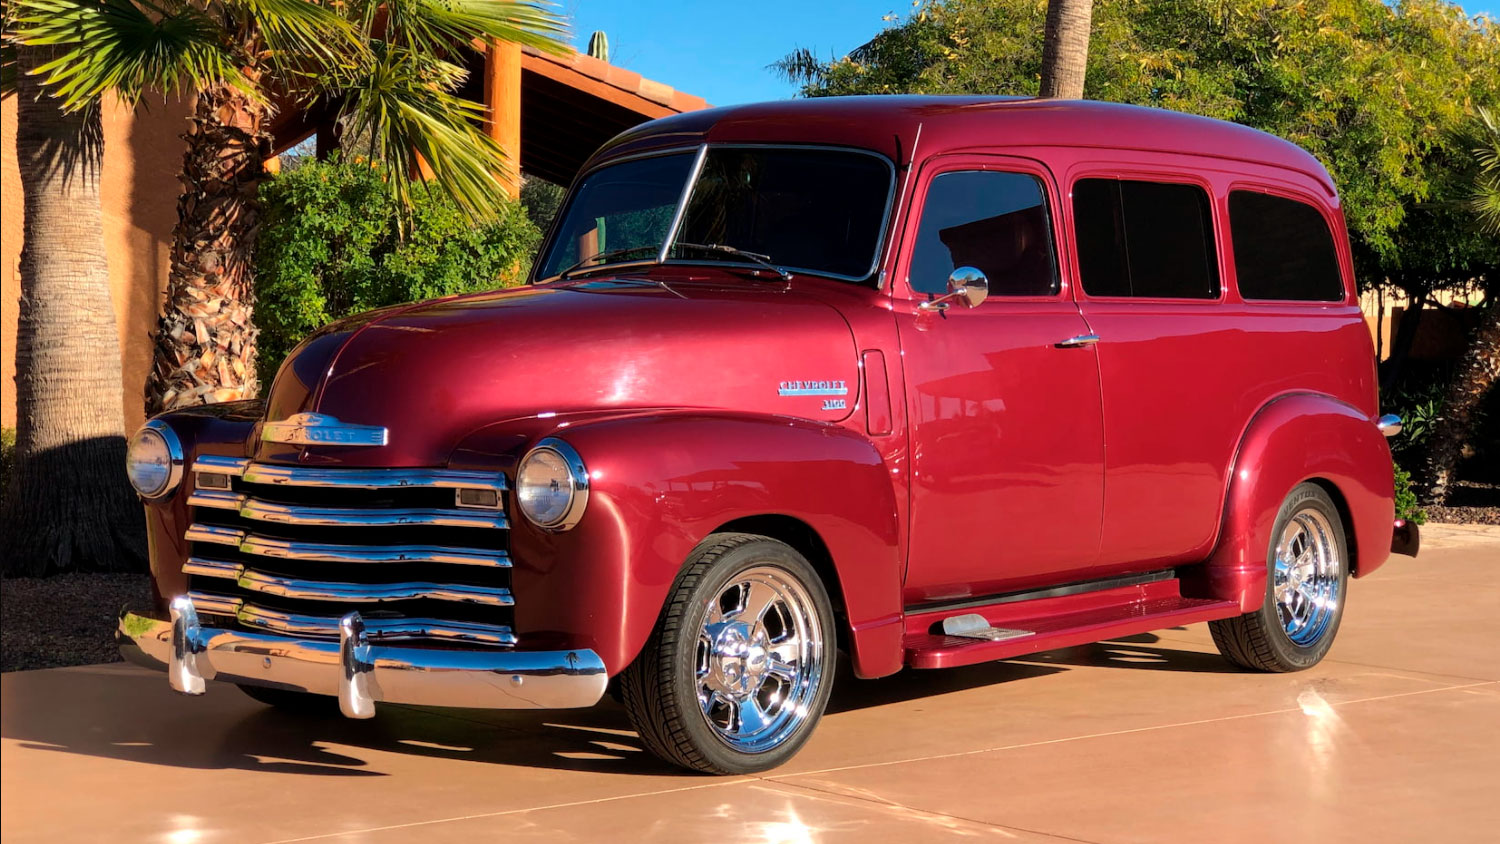 1948 Chevrolet Suburban Carry-all, This vehicle was on disp…